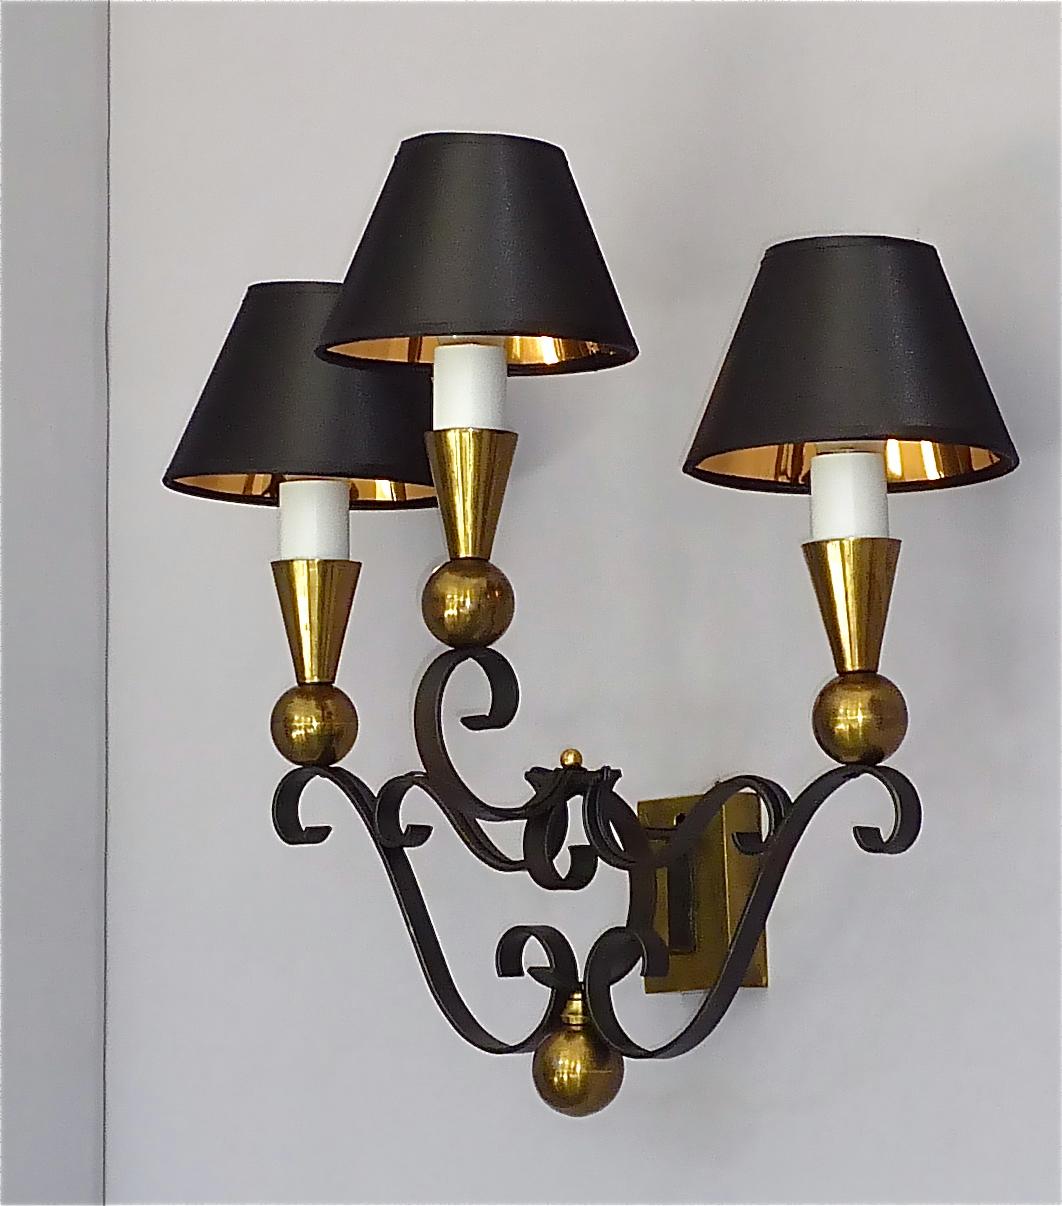 3 Rare Sconces Poillerat Adnet Style Black Forged Iron Brass Gold France 1950s For Sale 1